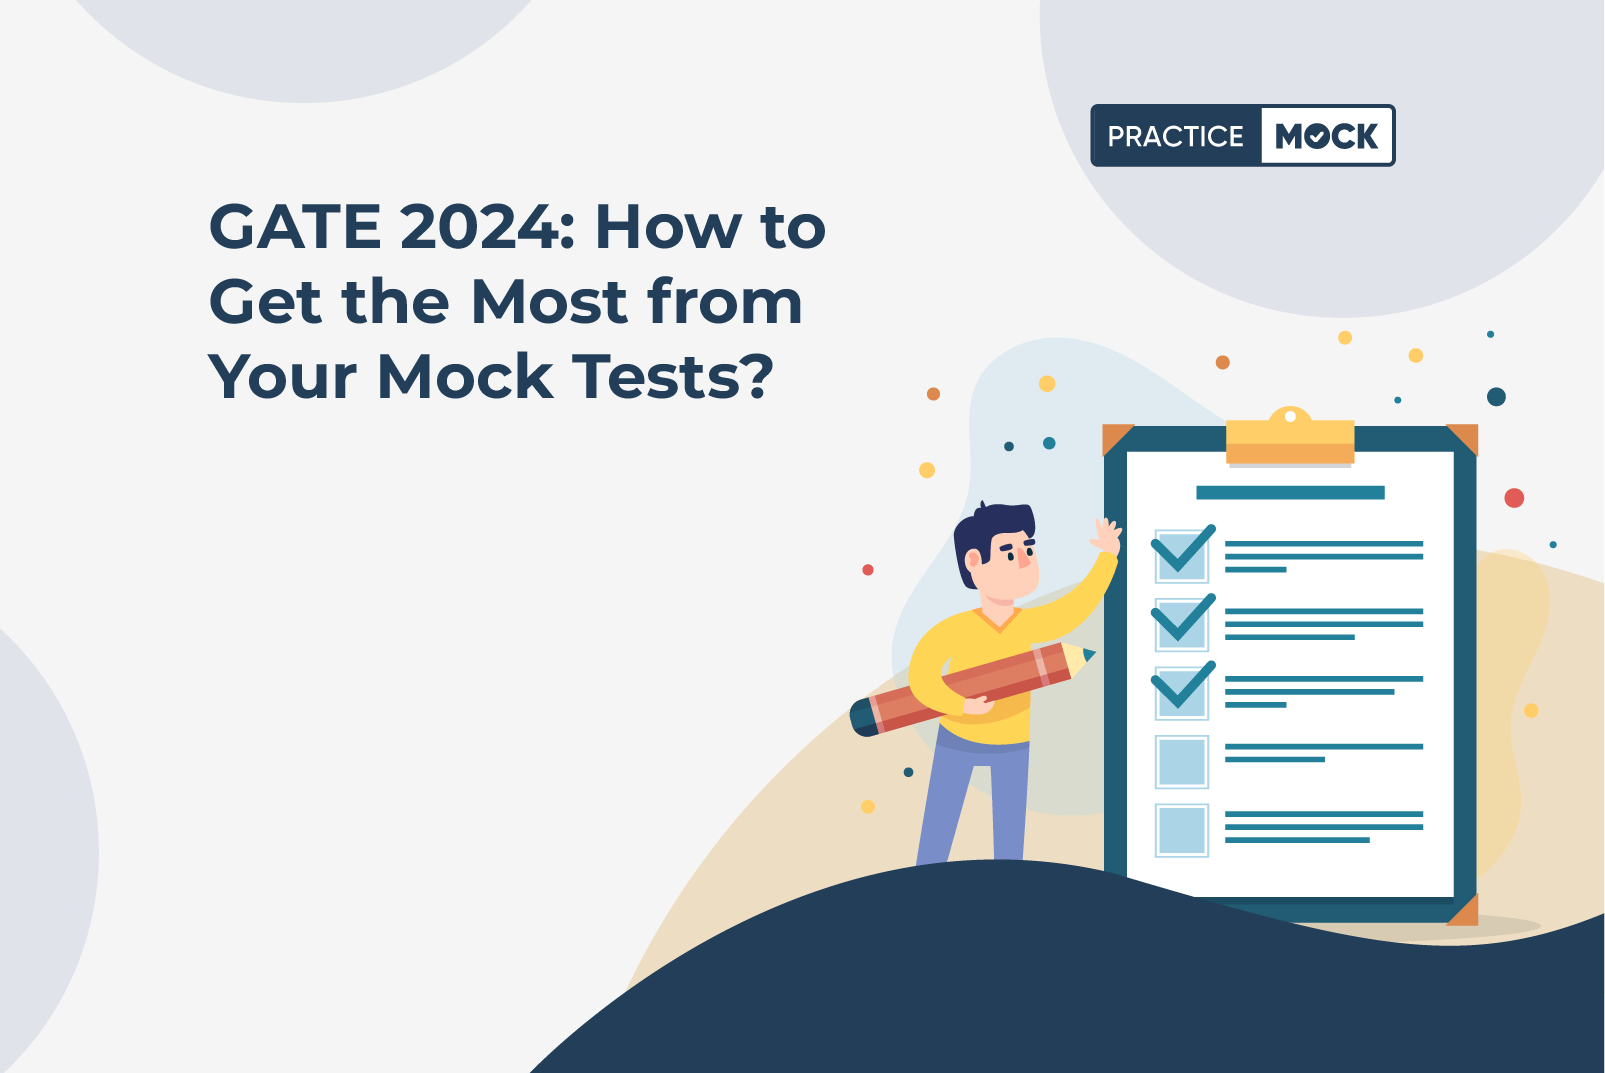 GATE 2024: How to Get the Most from Your Mock Tests?